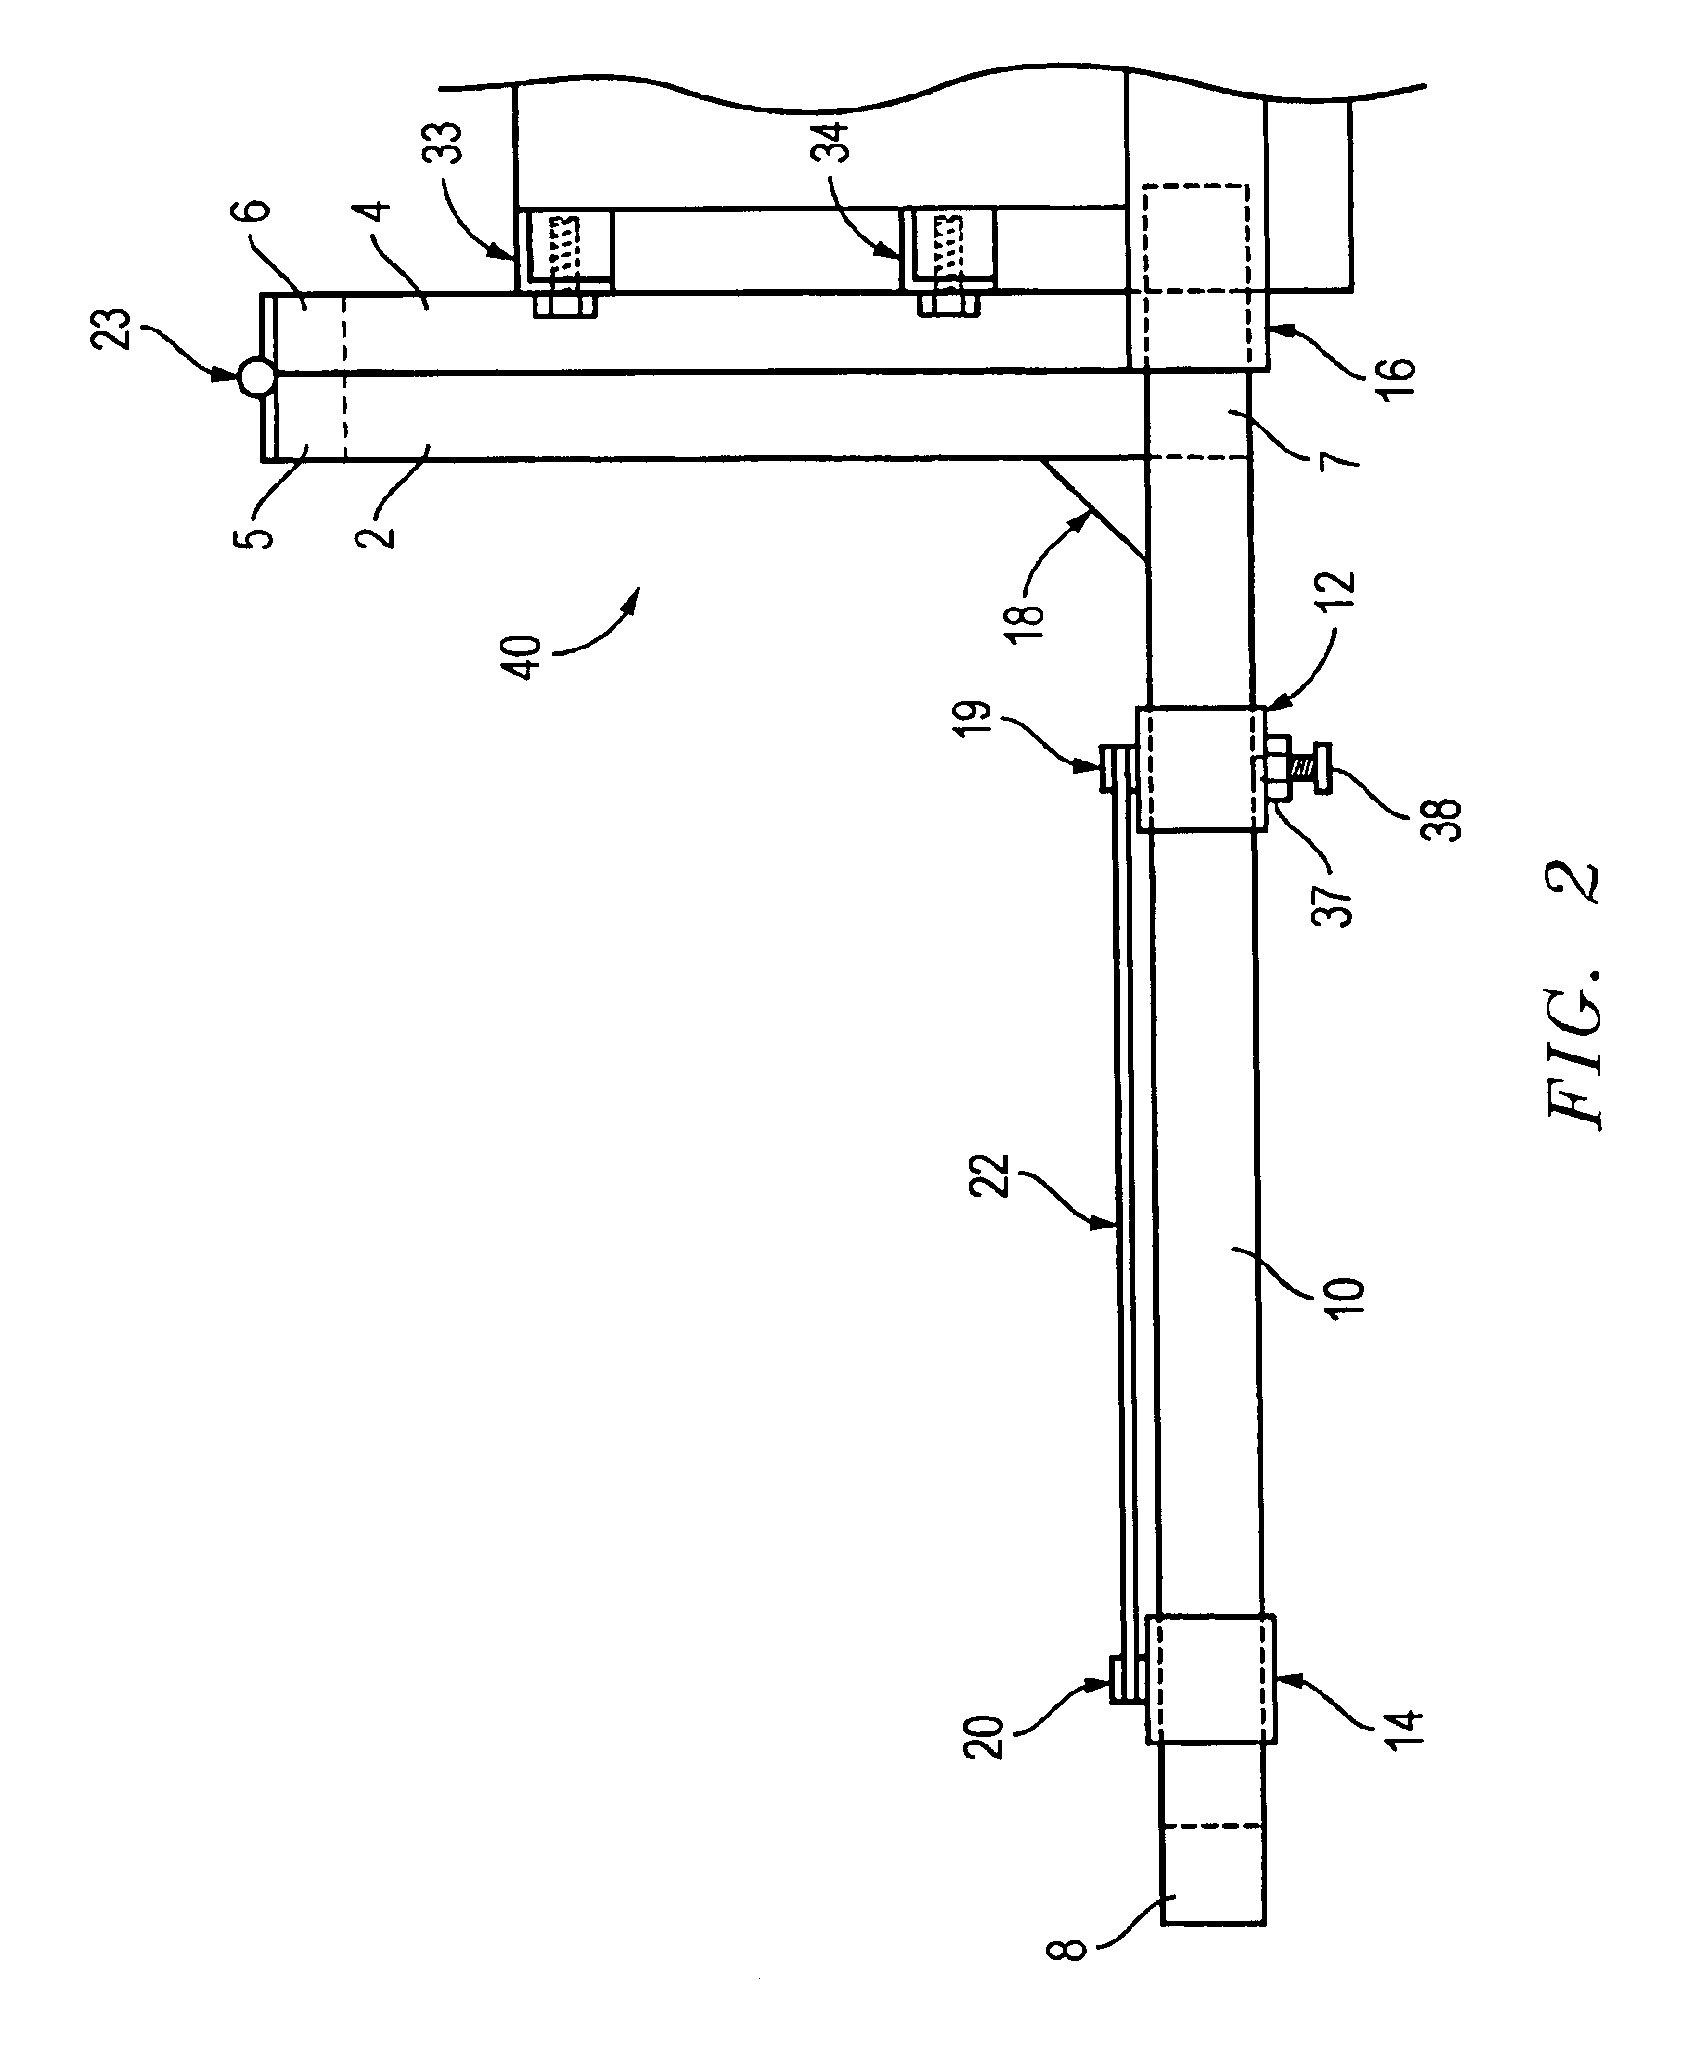 Hinged saw table, system, and method for forming and cutting an elongate workpiece